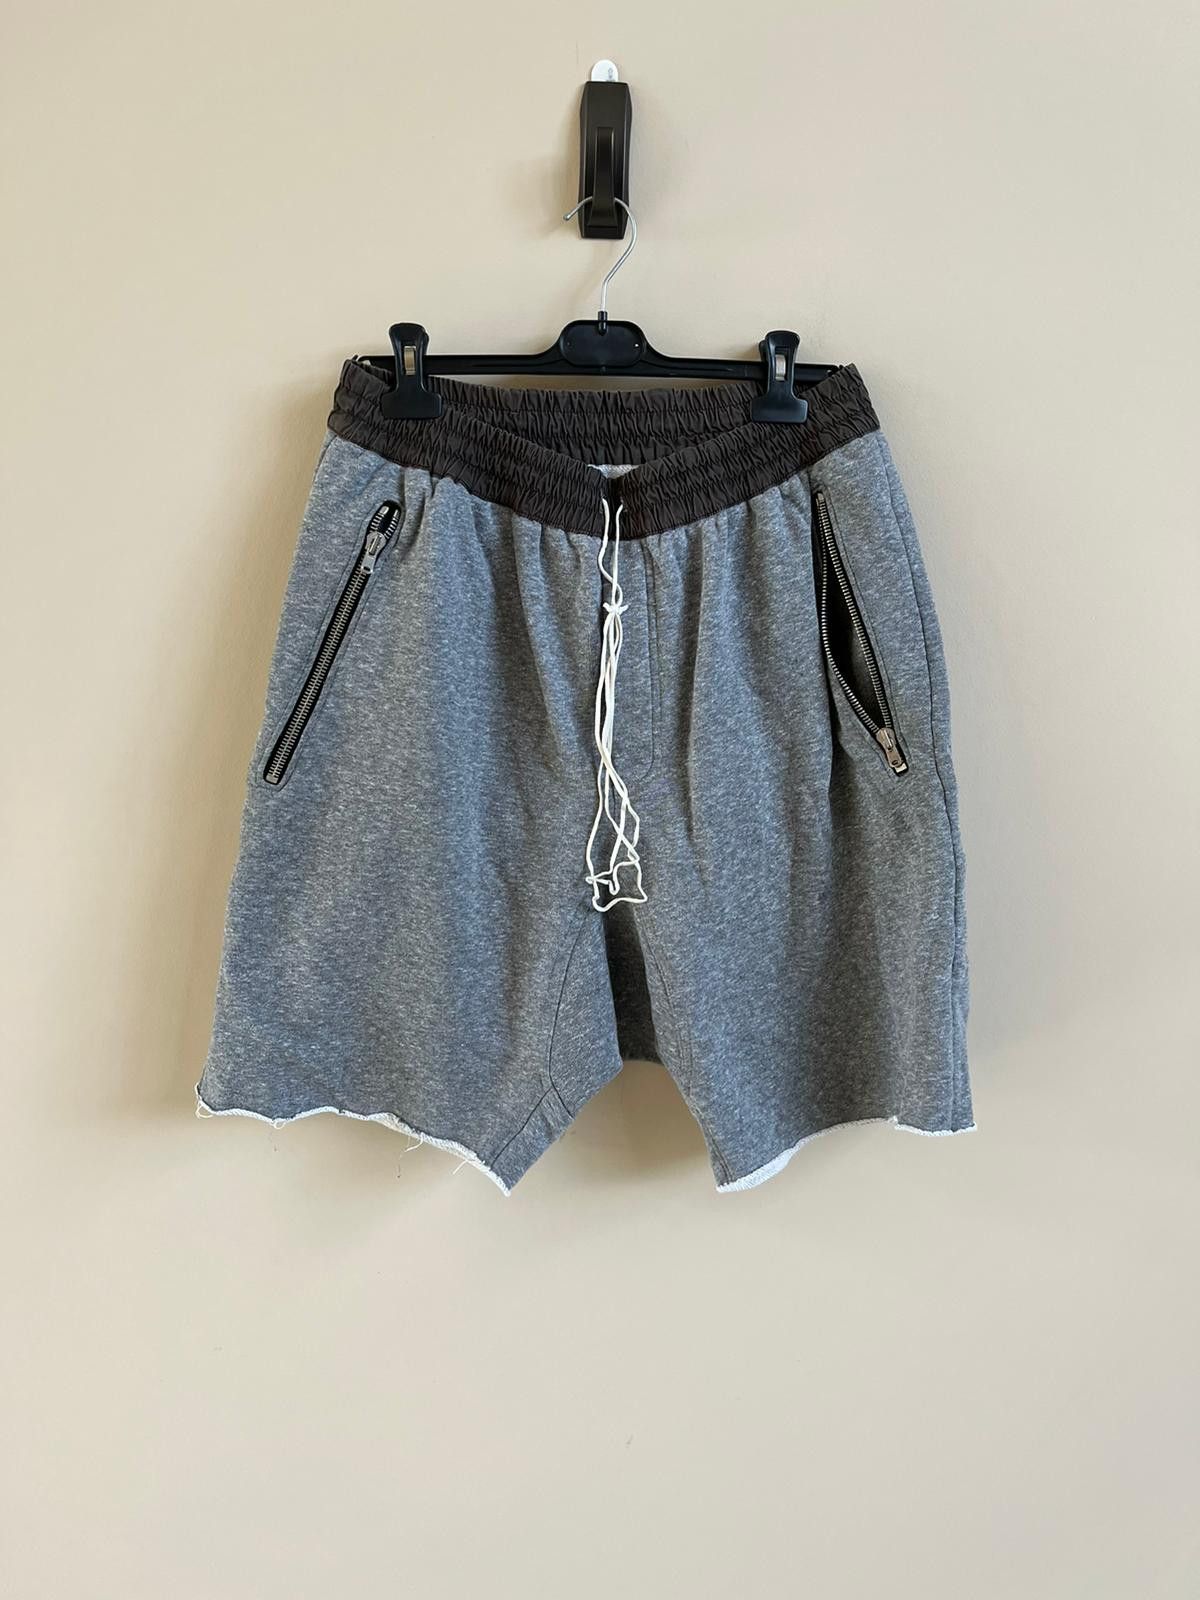 Fear of God Fourth Collection Shorts in Grey Color | Grailed